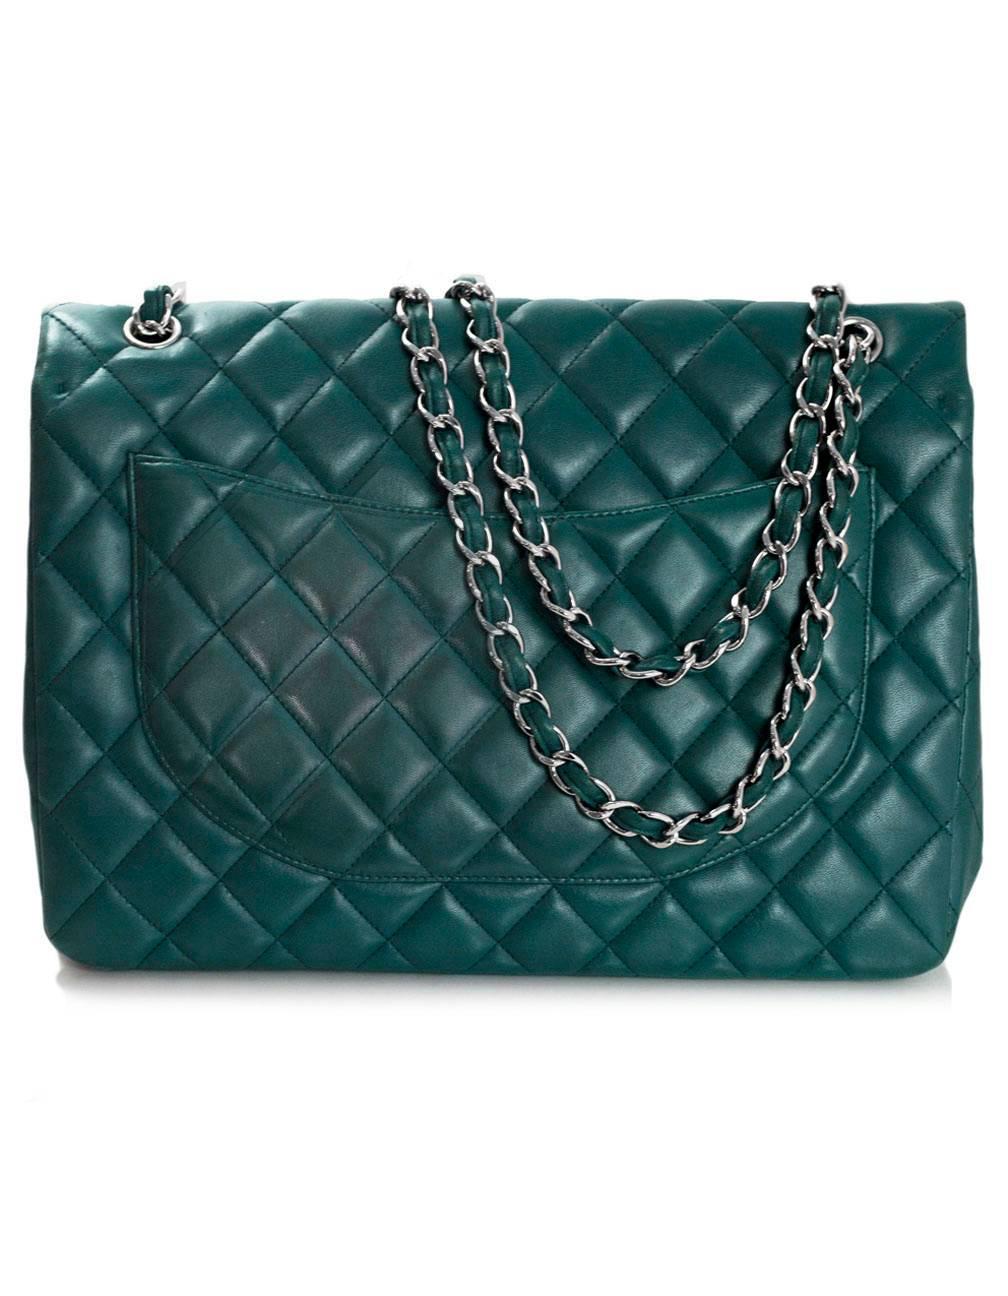 teal chanel